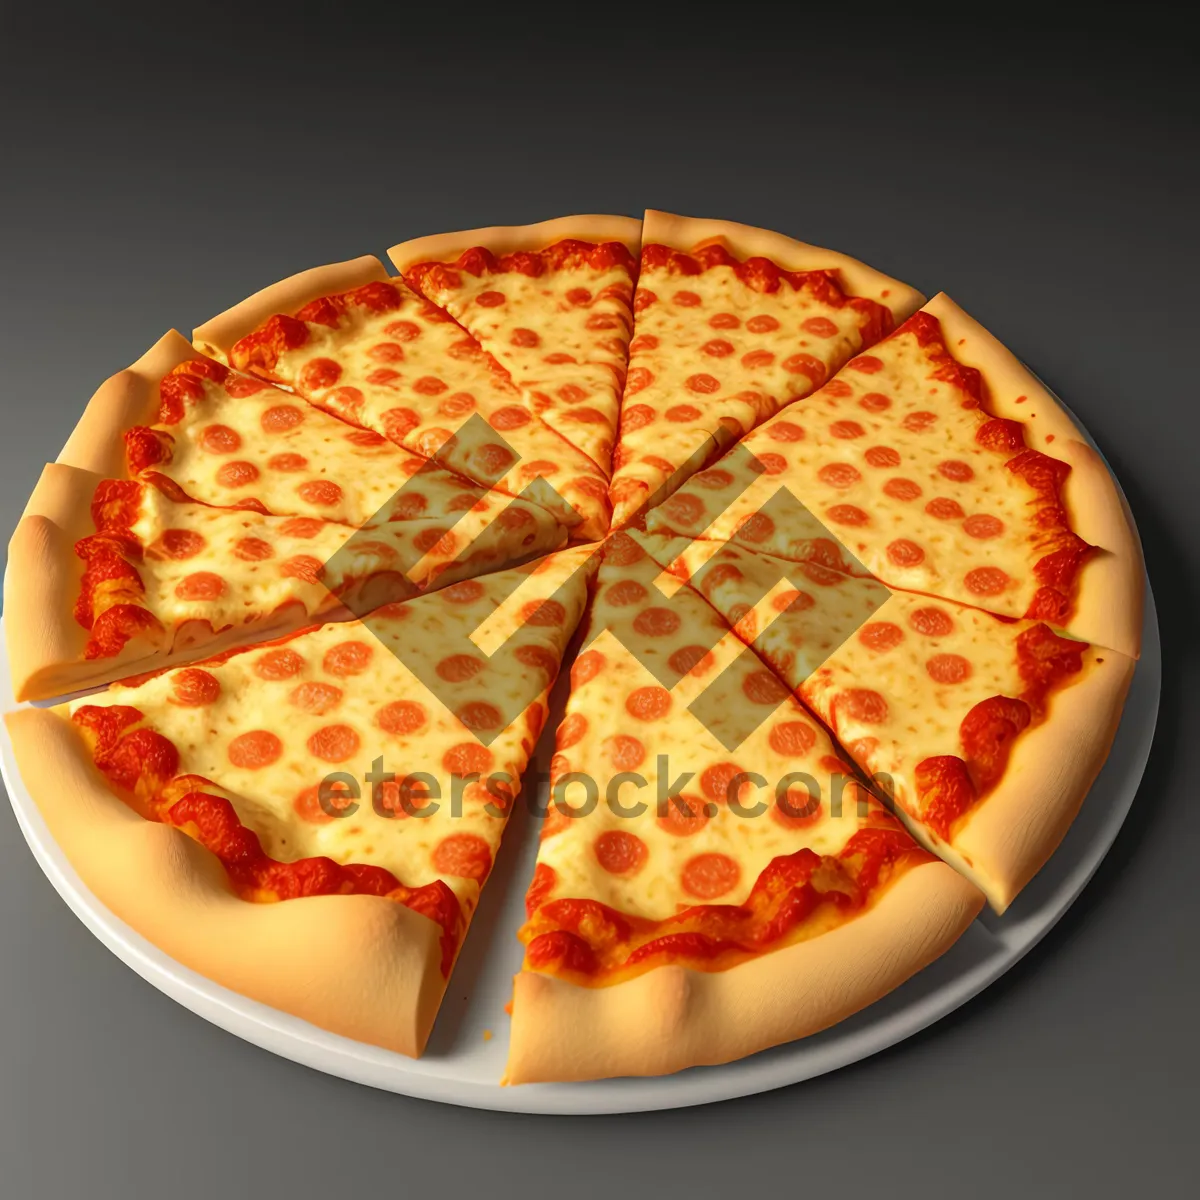 Picture of Delicious Gourmet Pizza with Fresh Tomato and Citrus Twist